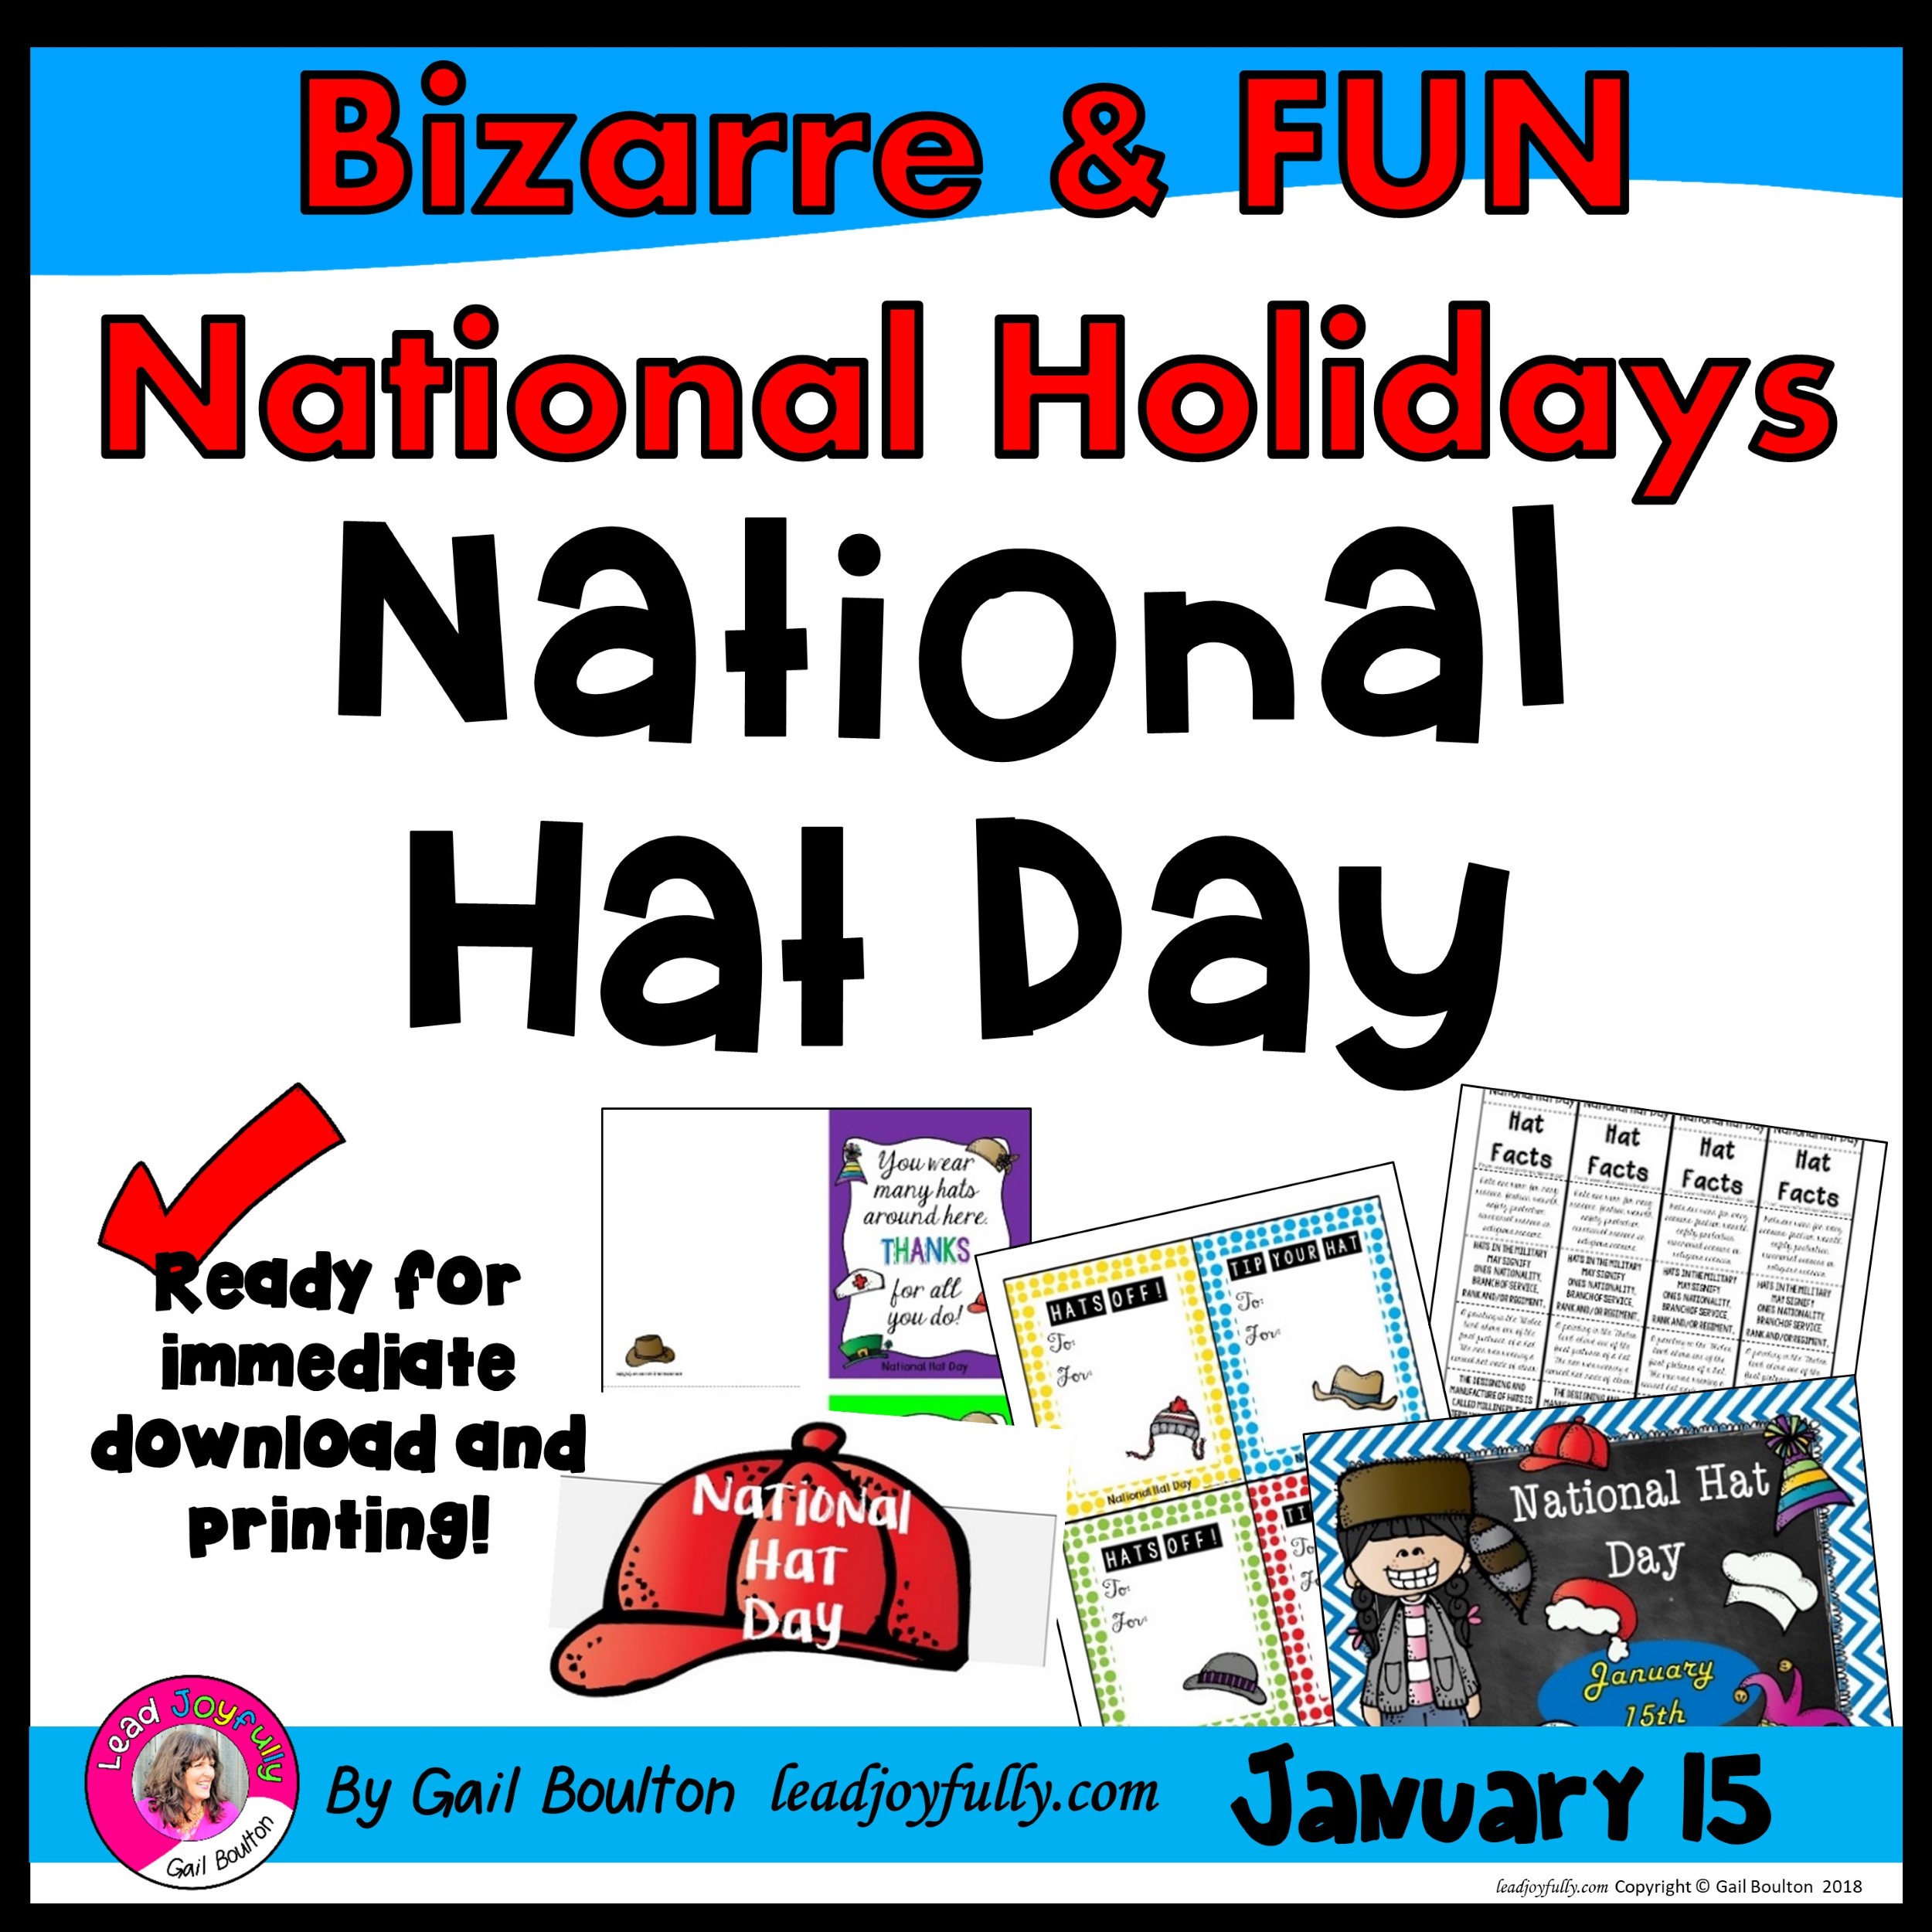 National Hat Day, January 15th.  School of Science and Technology -  Sugarland